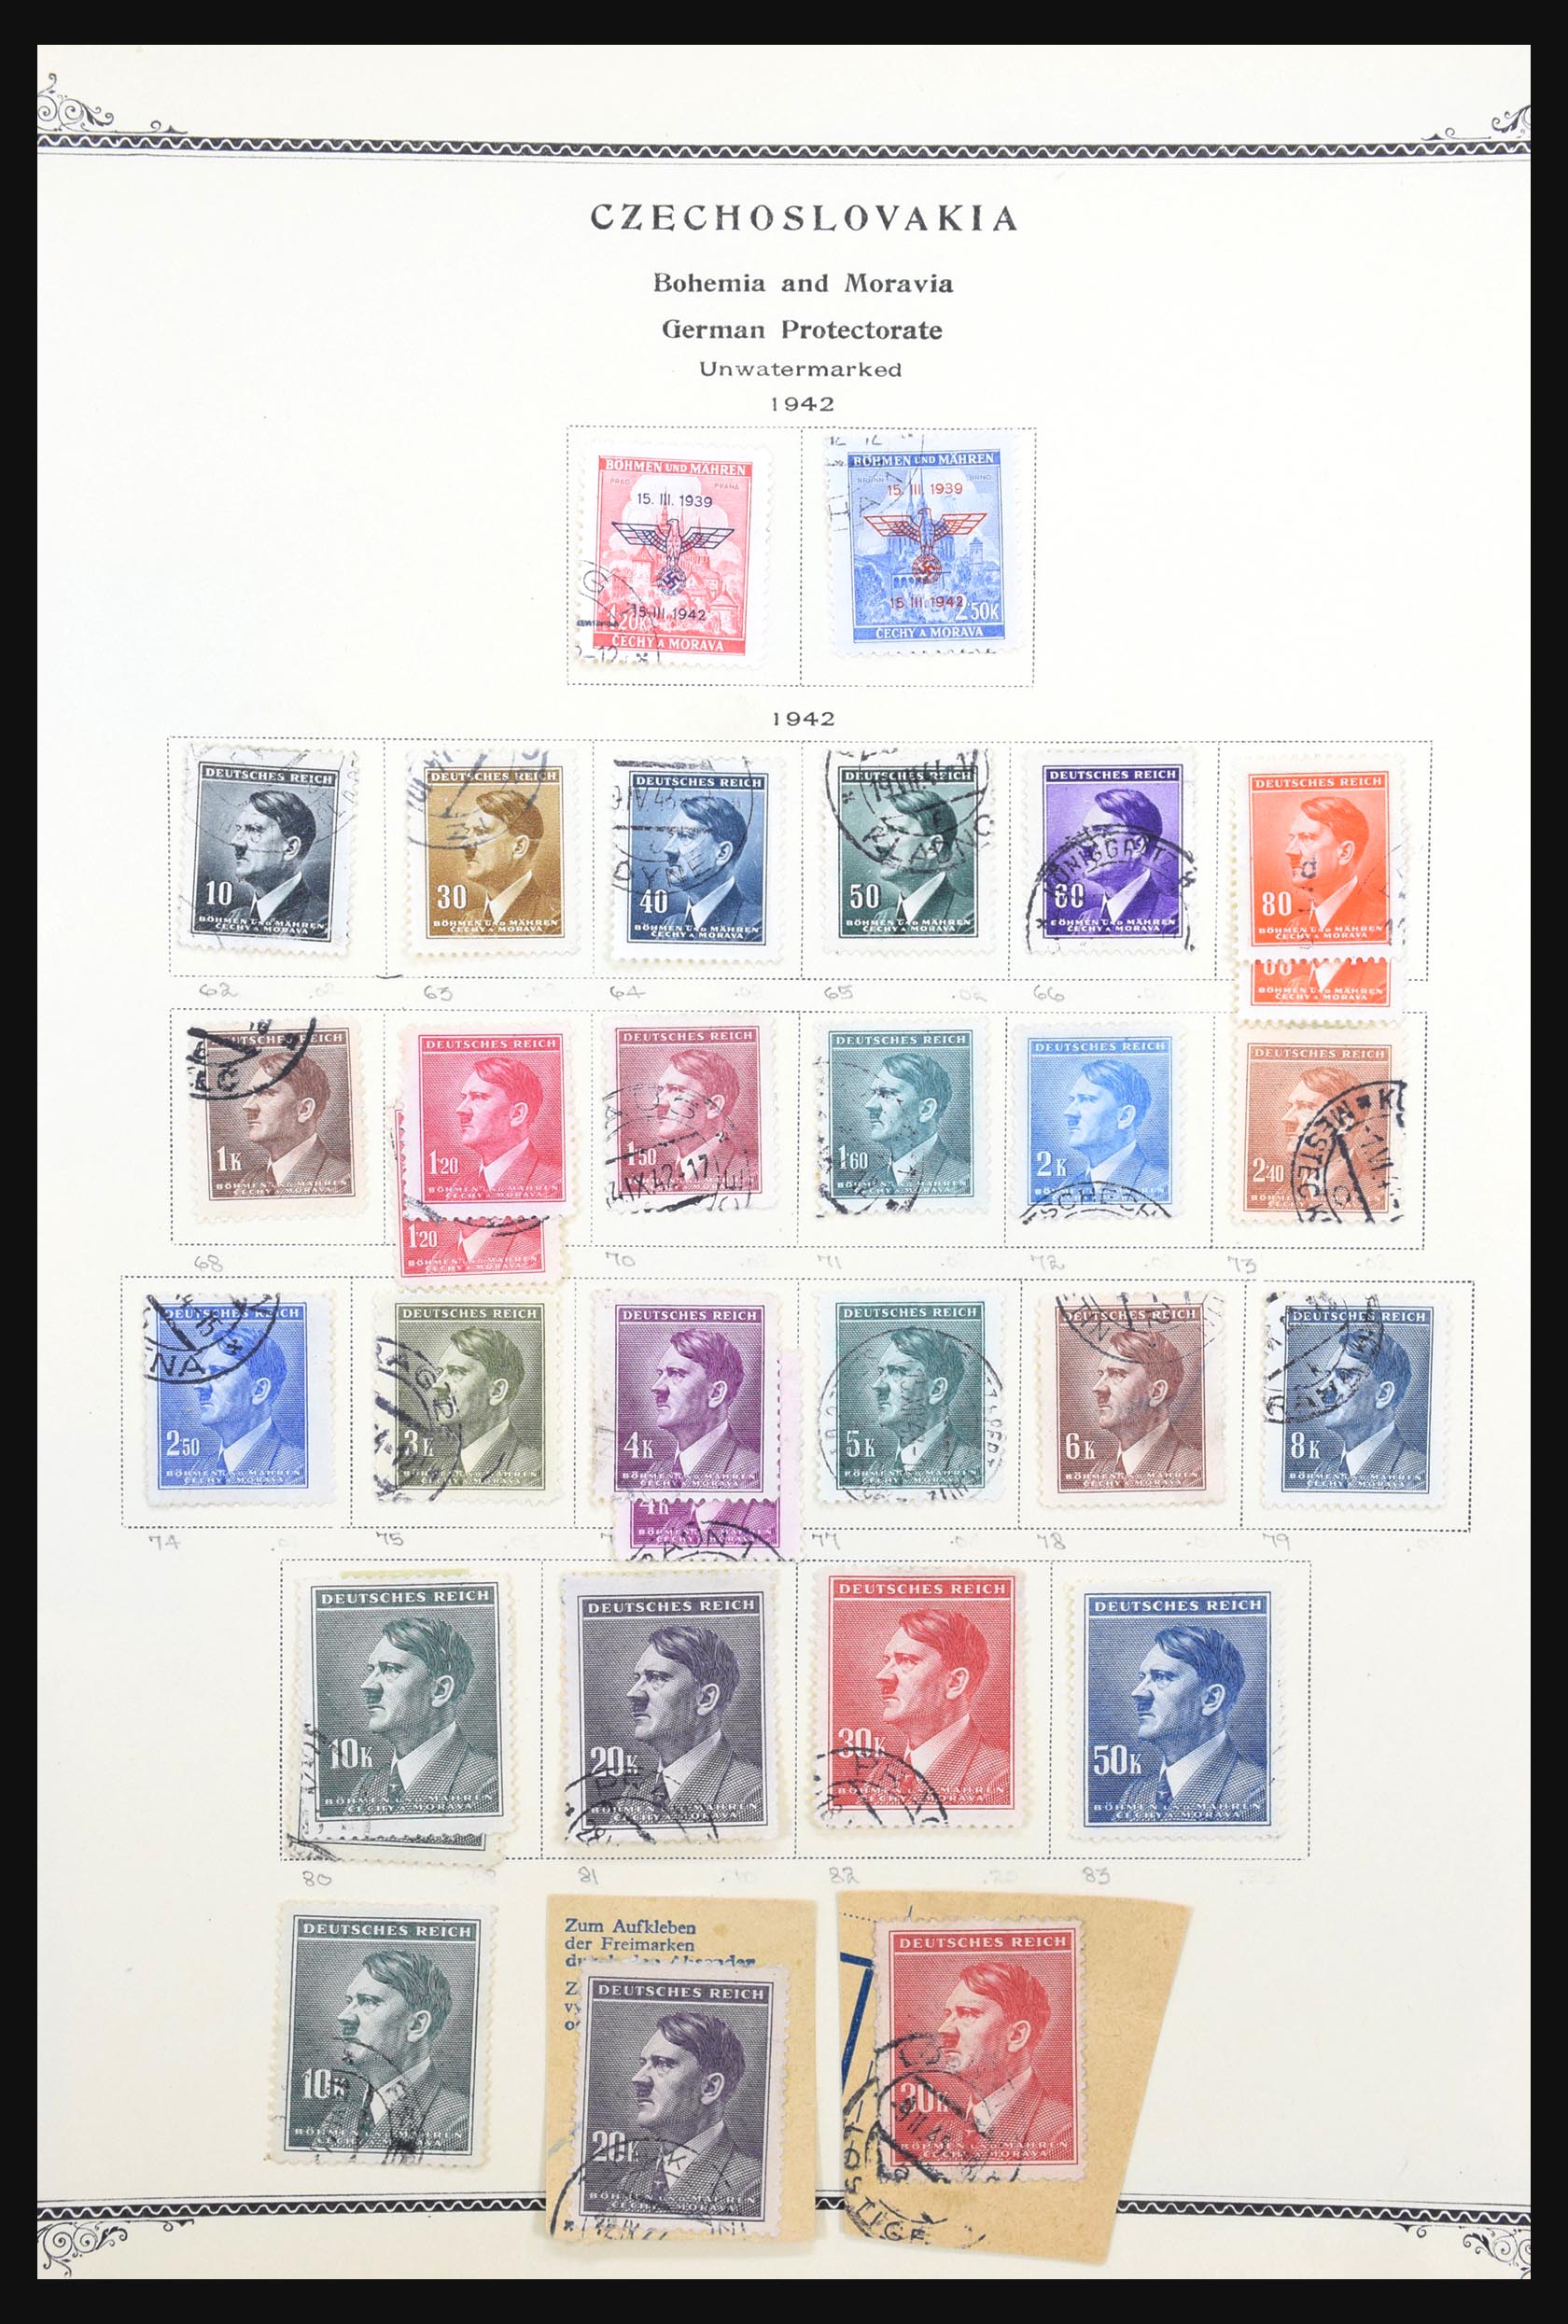 31300 035 - 31300 Germany supercollection 1849-1990.